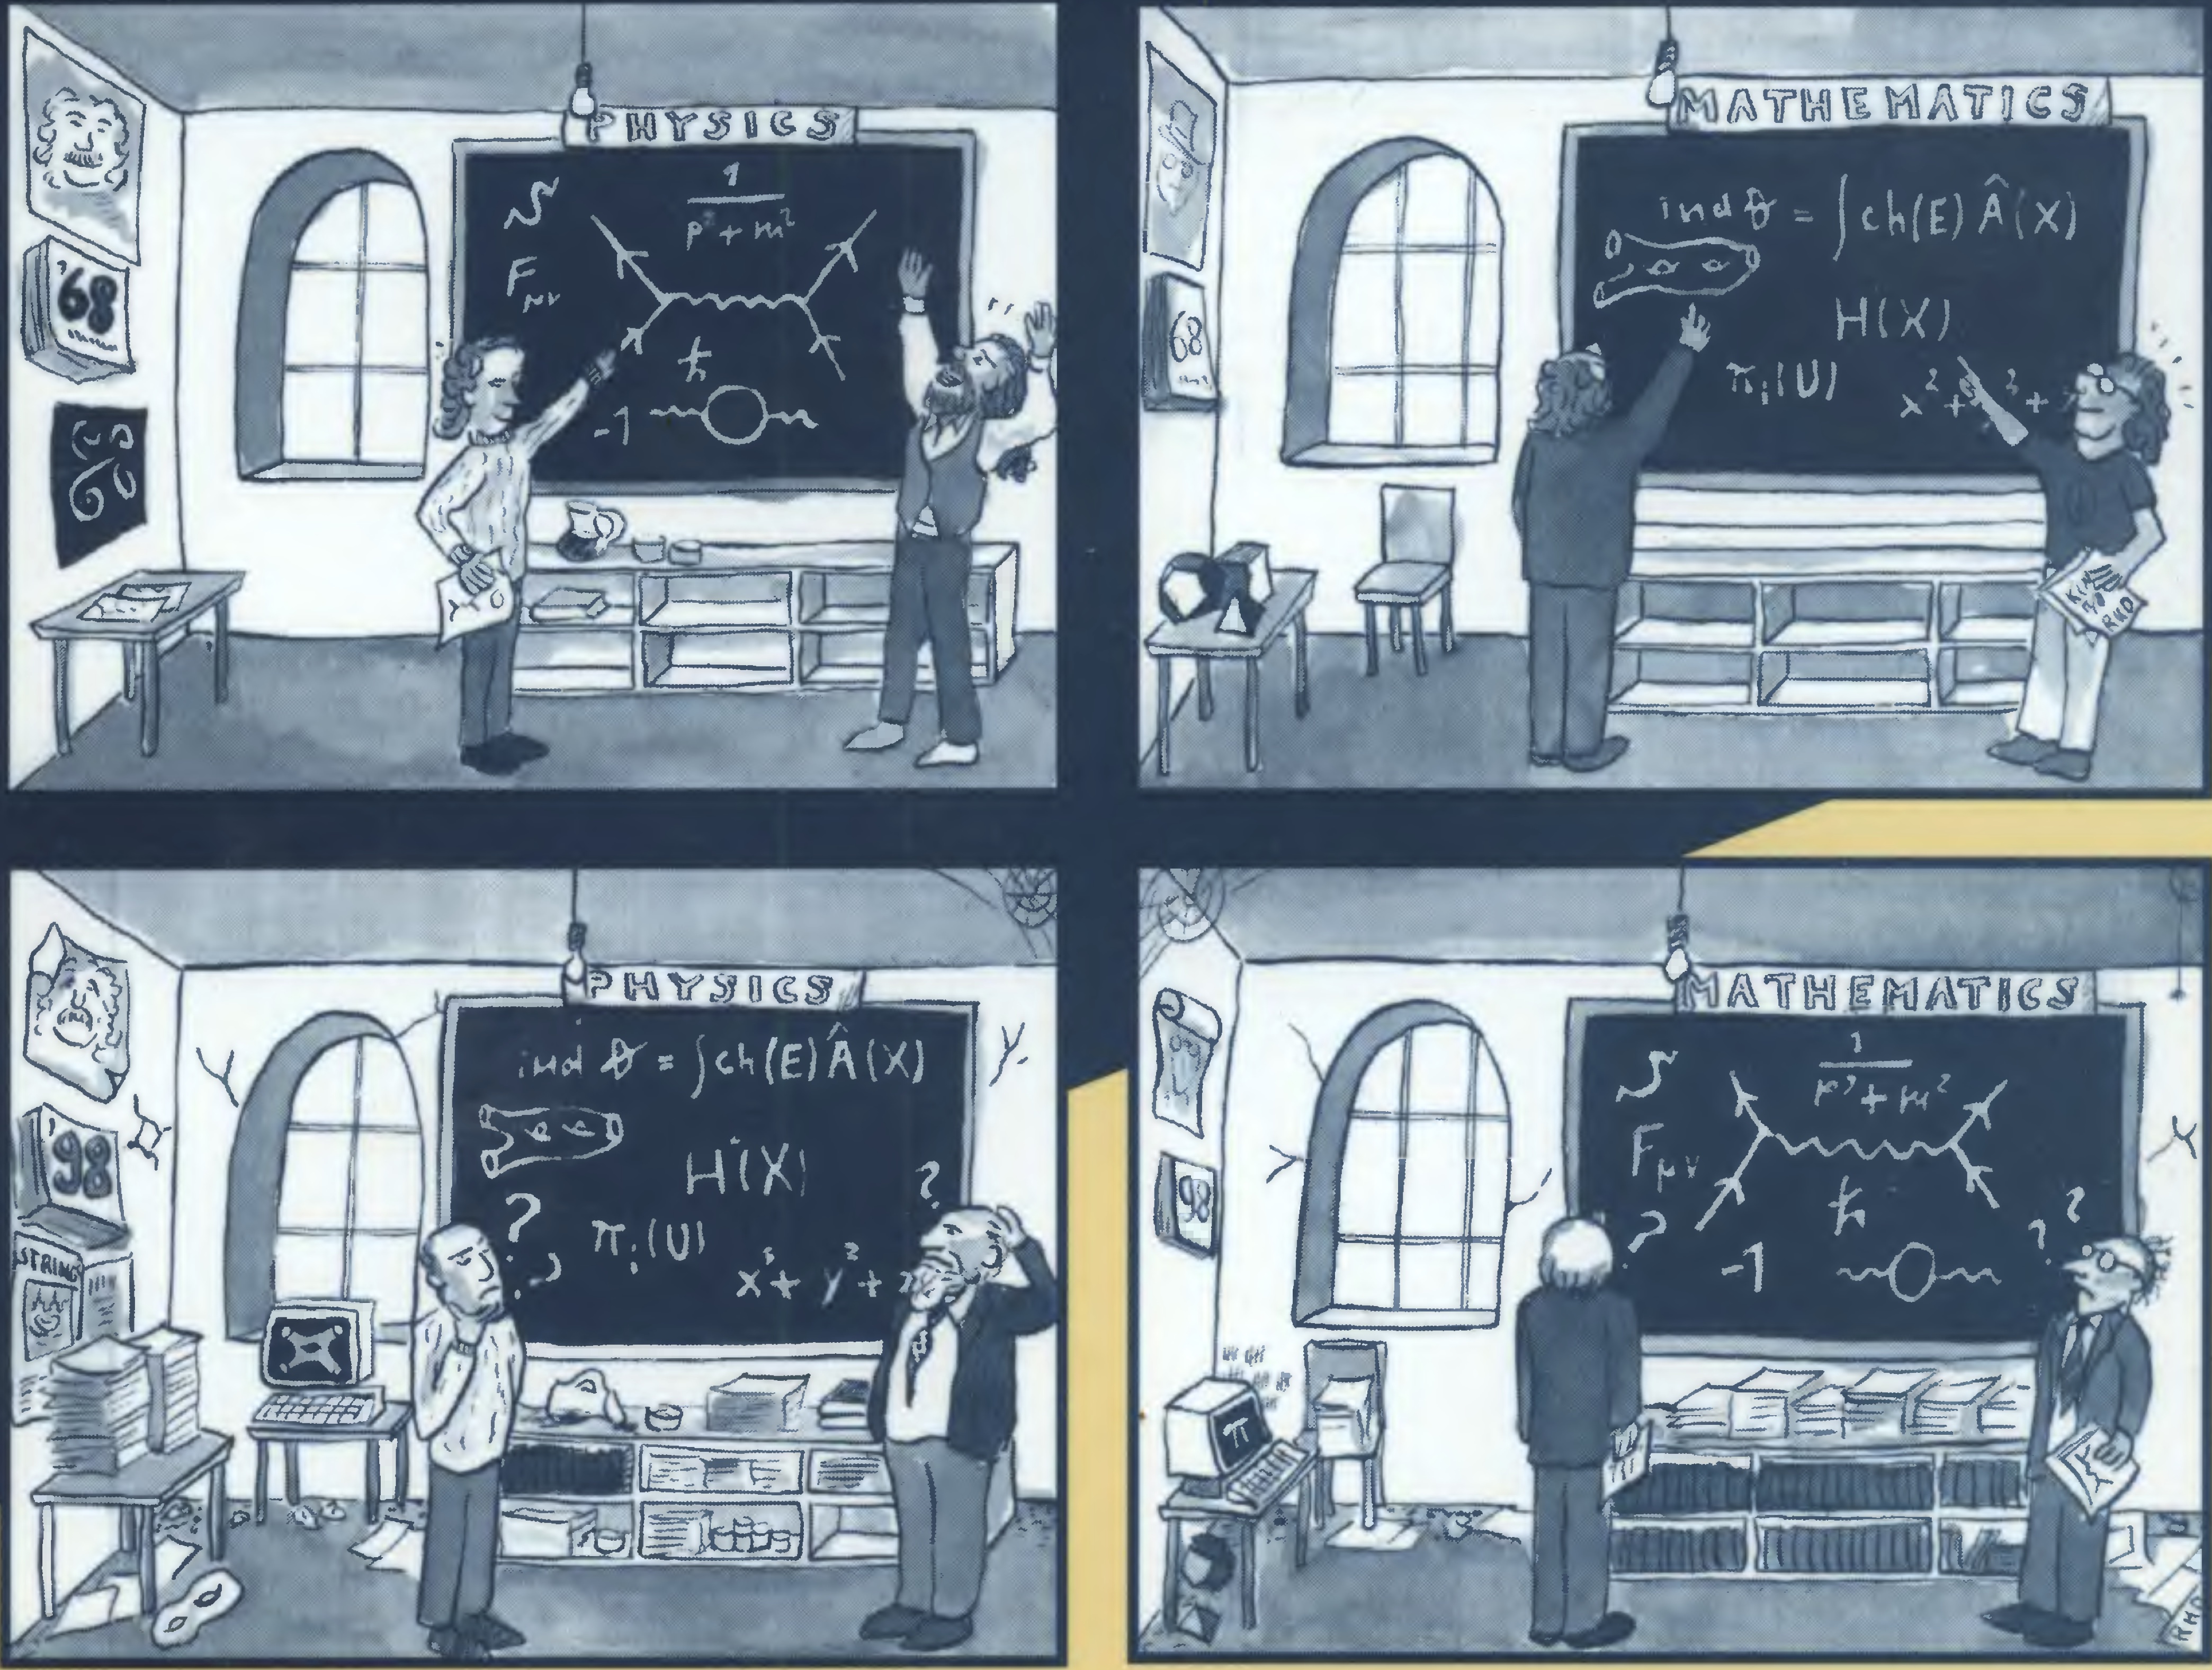 A comic with four panels, each depicting a pair of scientists in front of a blackboard scribbled with equations and diagrams. The first panel depicts a pair of young theoretical physicists, in 1968, joyously discussing physics in front of a board with Feynman diagrams. The second panel depicts a similar scene in 1968 with a pair of young mathematicians, in front of a board with advanced mathematics. The next two panels depict the same people and same boards, but in 1998. Both pairs of people are now old, and the mathematicians stand in front of the board with physics, perplexed, as perplexed as the physicists in front of the board with mathematics.